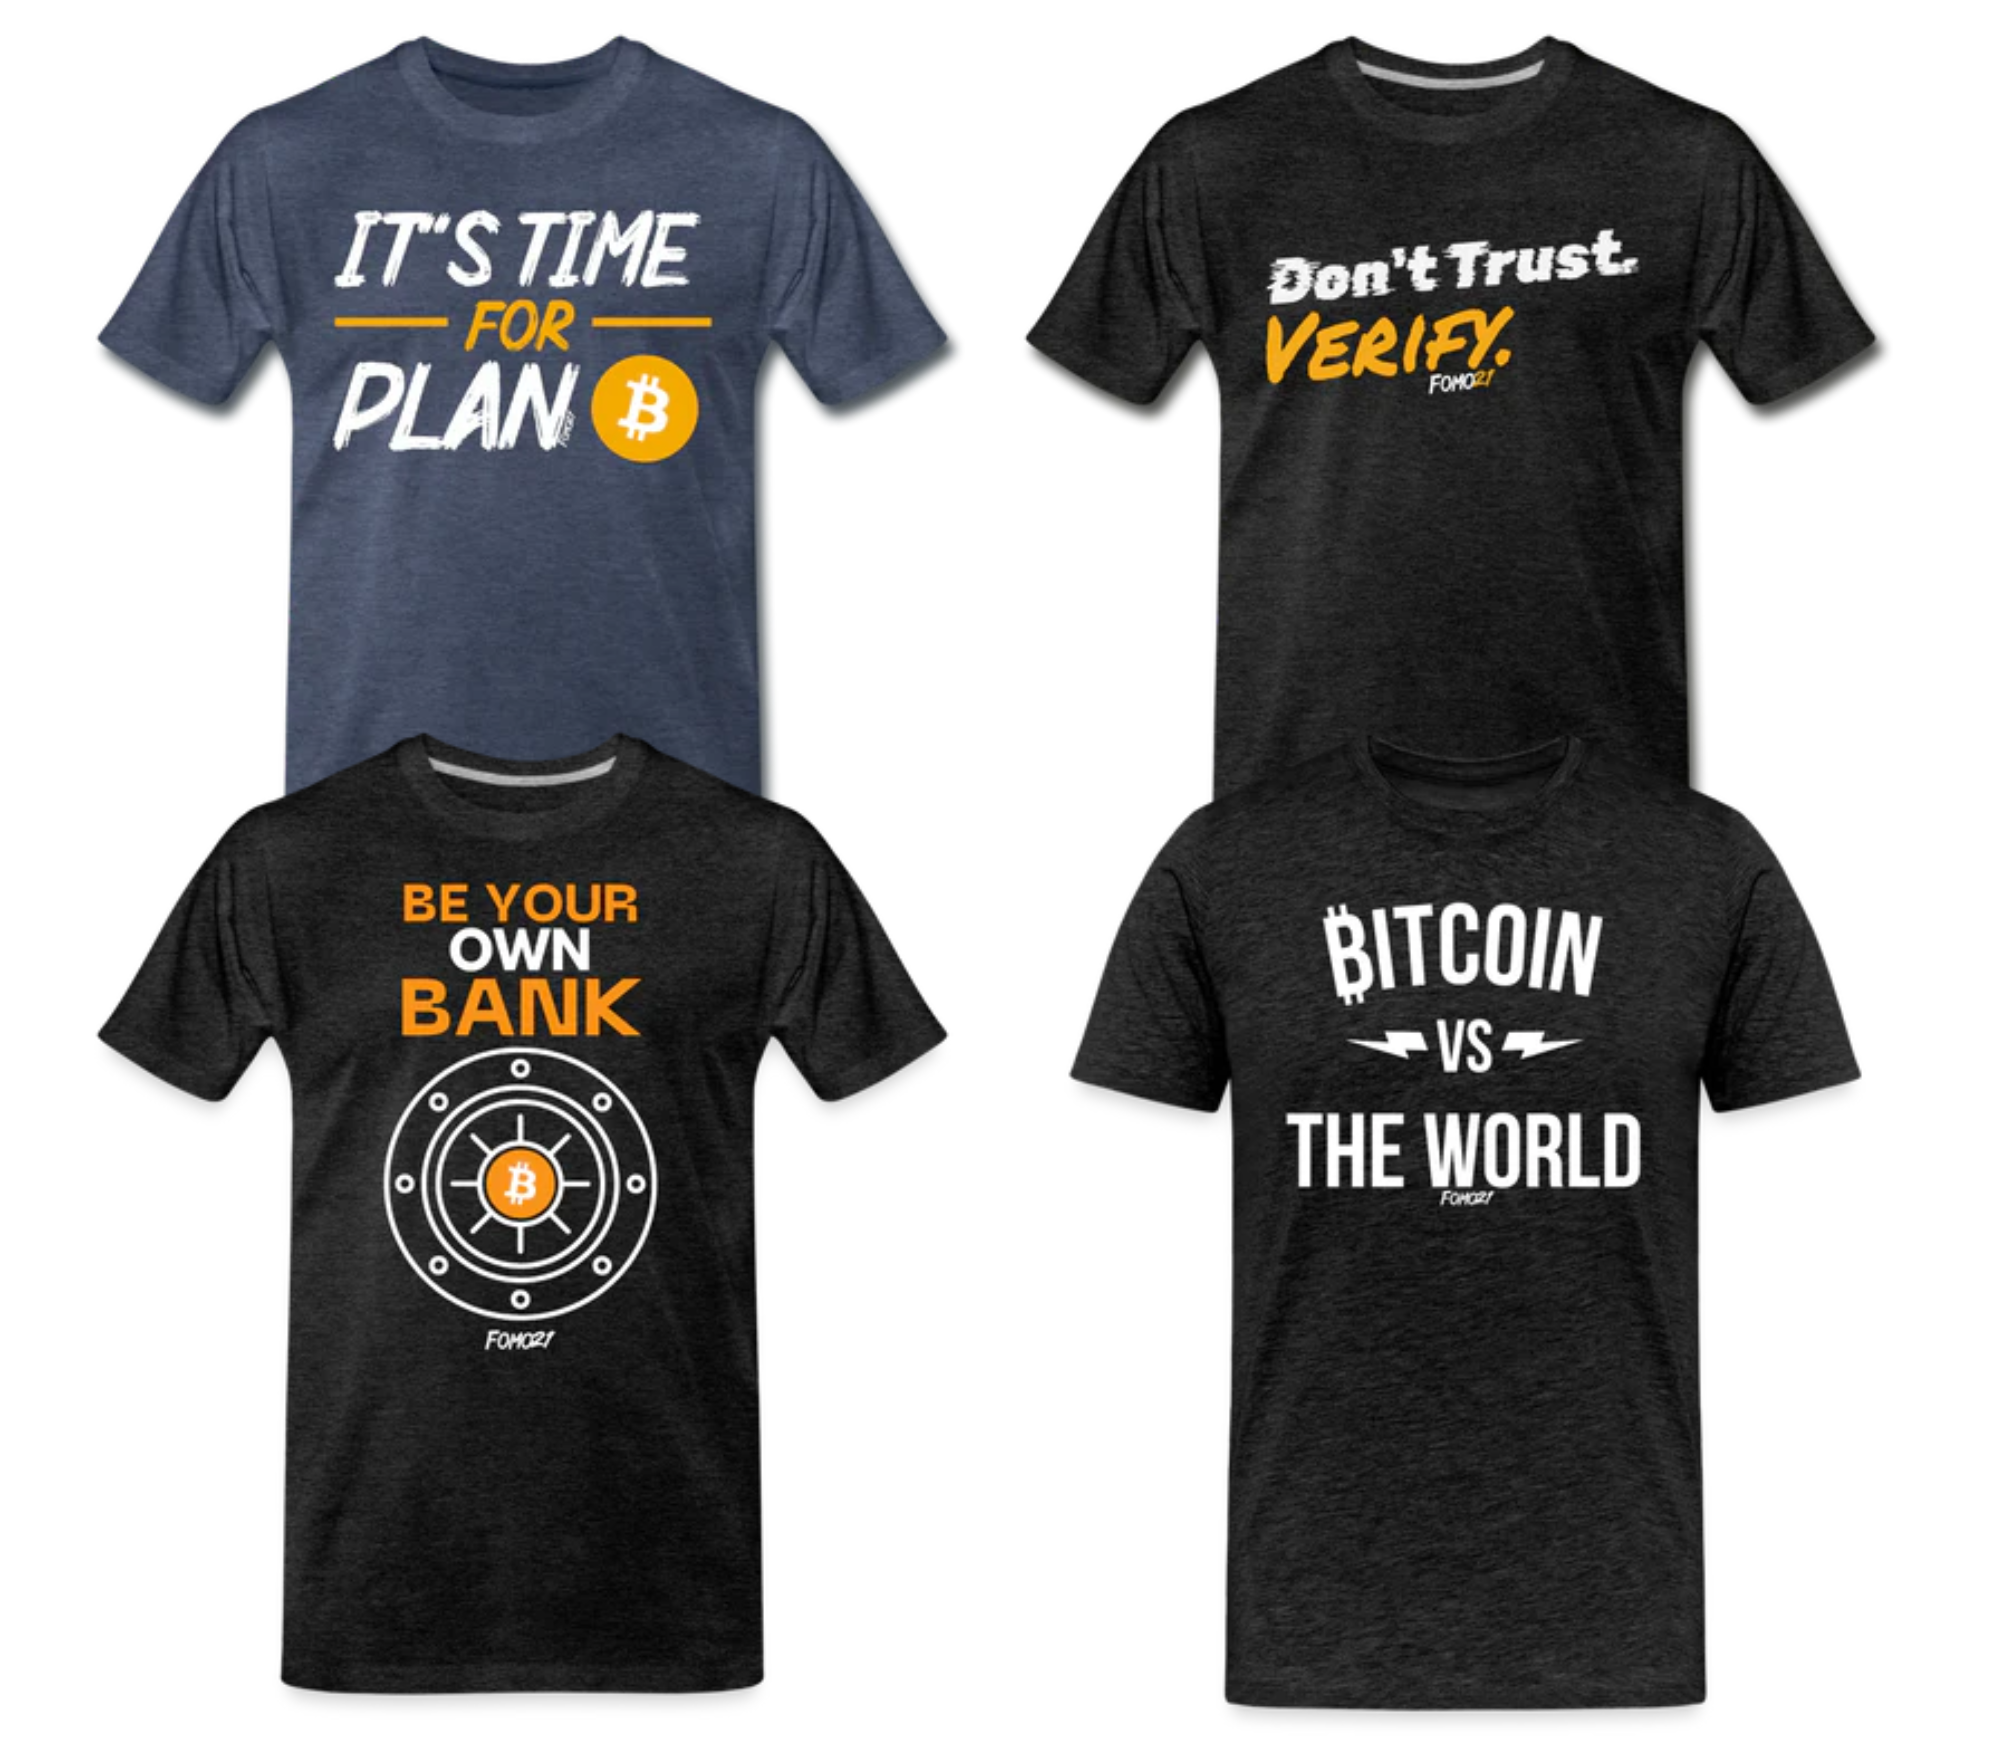 "Why You Need to Add These Must-Have Bitcoin T-Shirts to Your Wardrobe - Available Now at FOMO21.com"